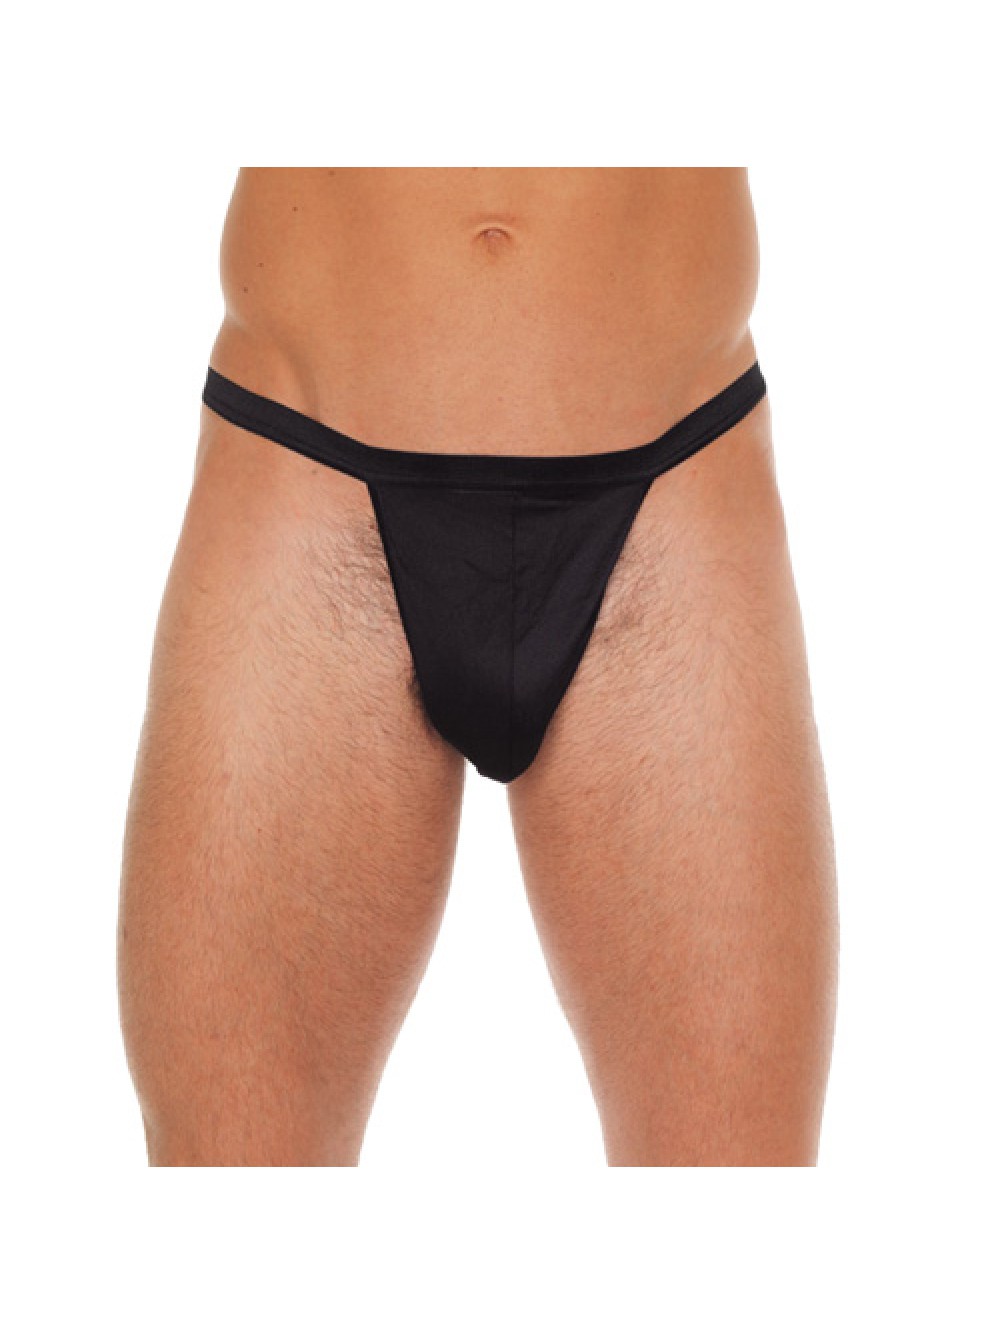 Mens Black Straight G-String With Black Pouch 8718924223291